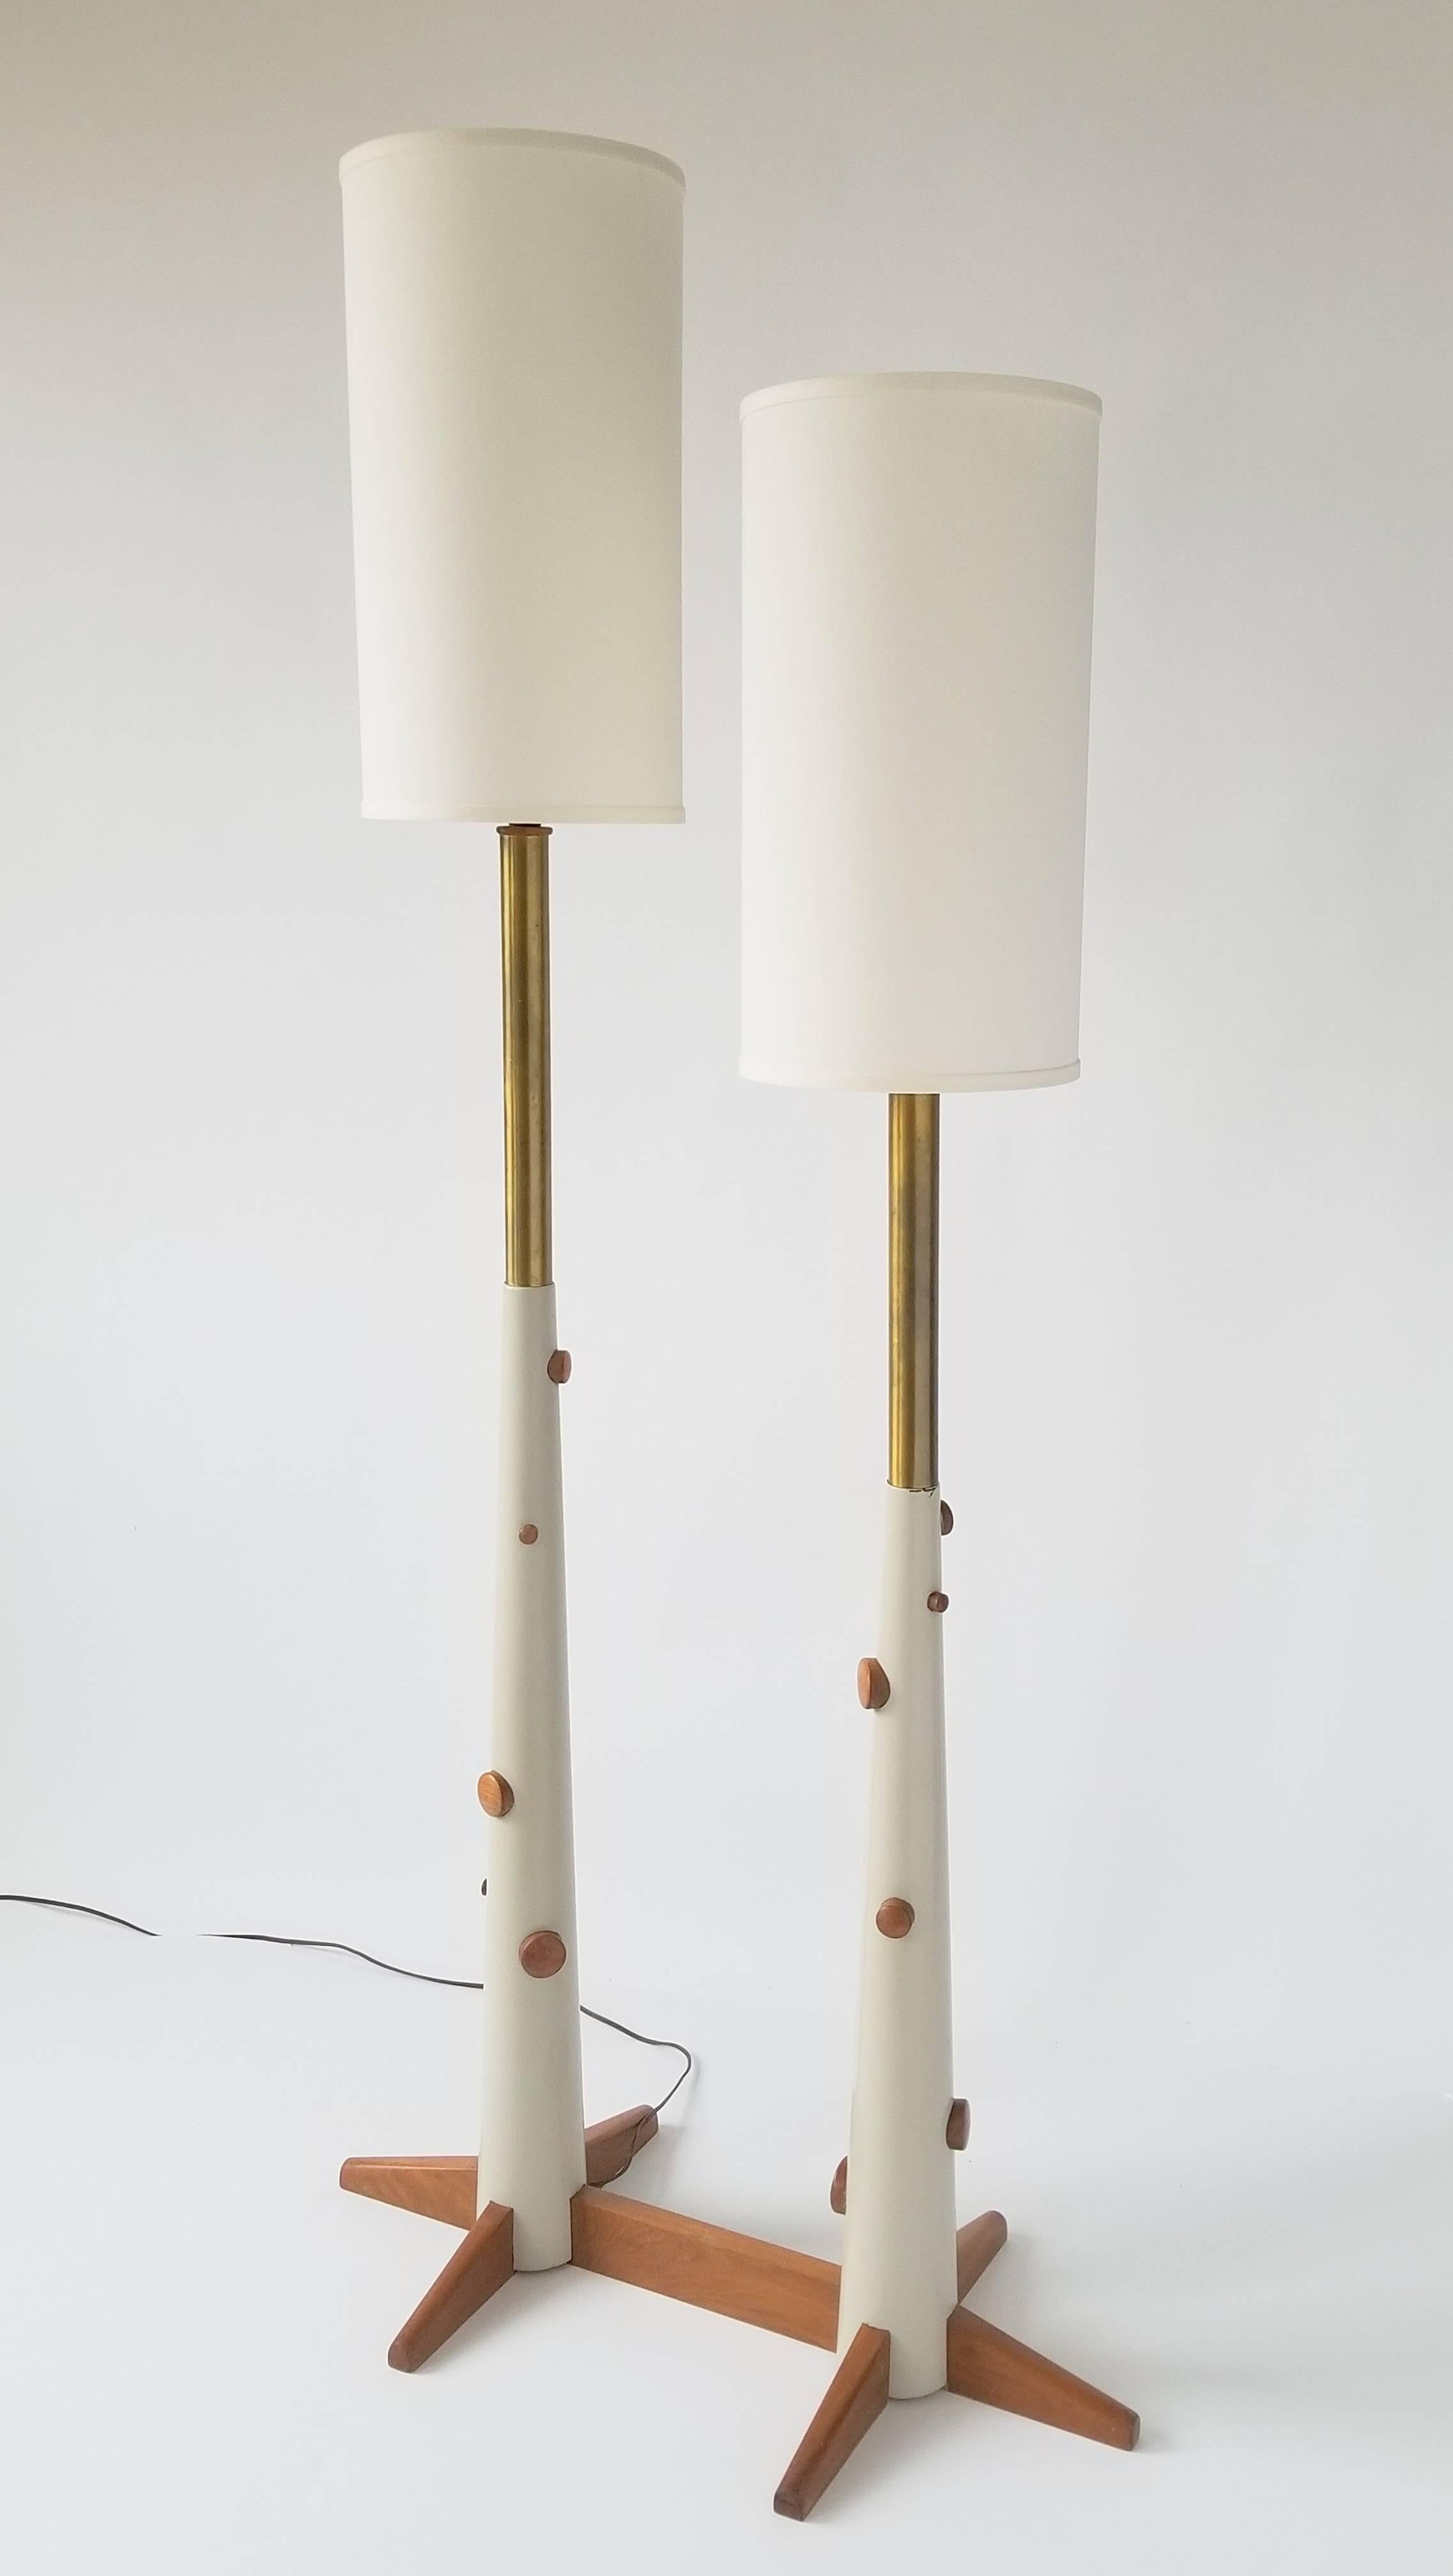 Unique twin stem floor lamp with  protruding  wood dot and base. 

The off-white lacquered conical pole are made of solid wood and are topped by a brass  tube.

Tallest side measure (with shade) 66.5 in. Shortest side 60 in.

Shade are new and where